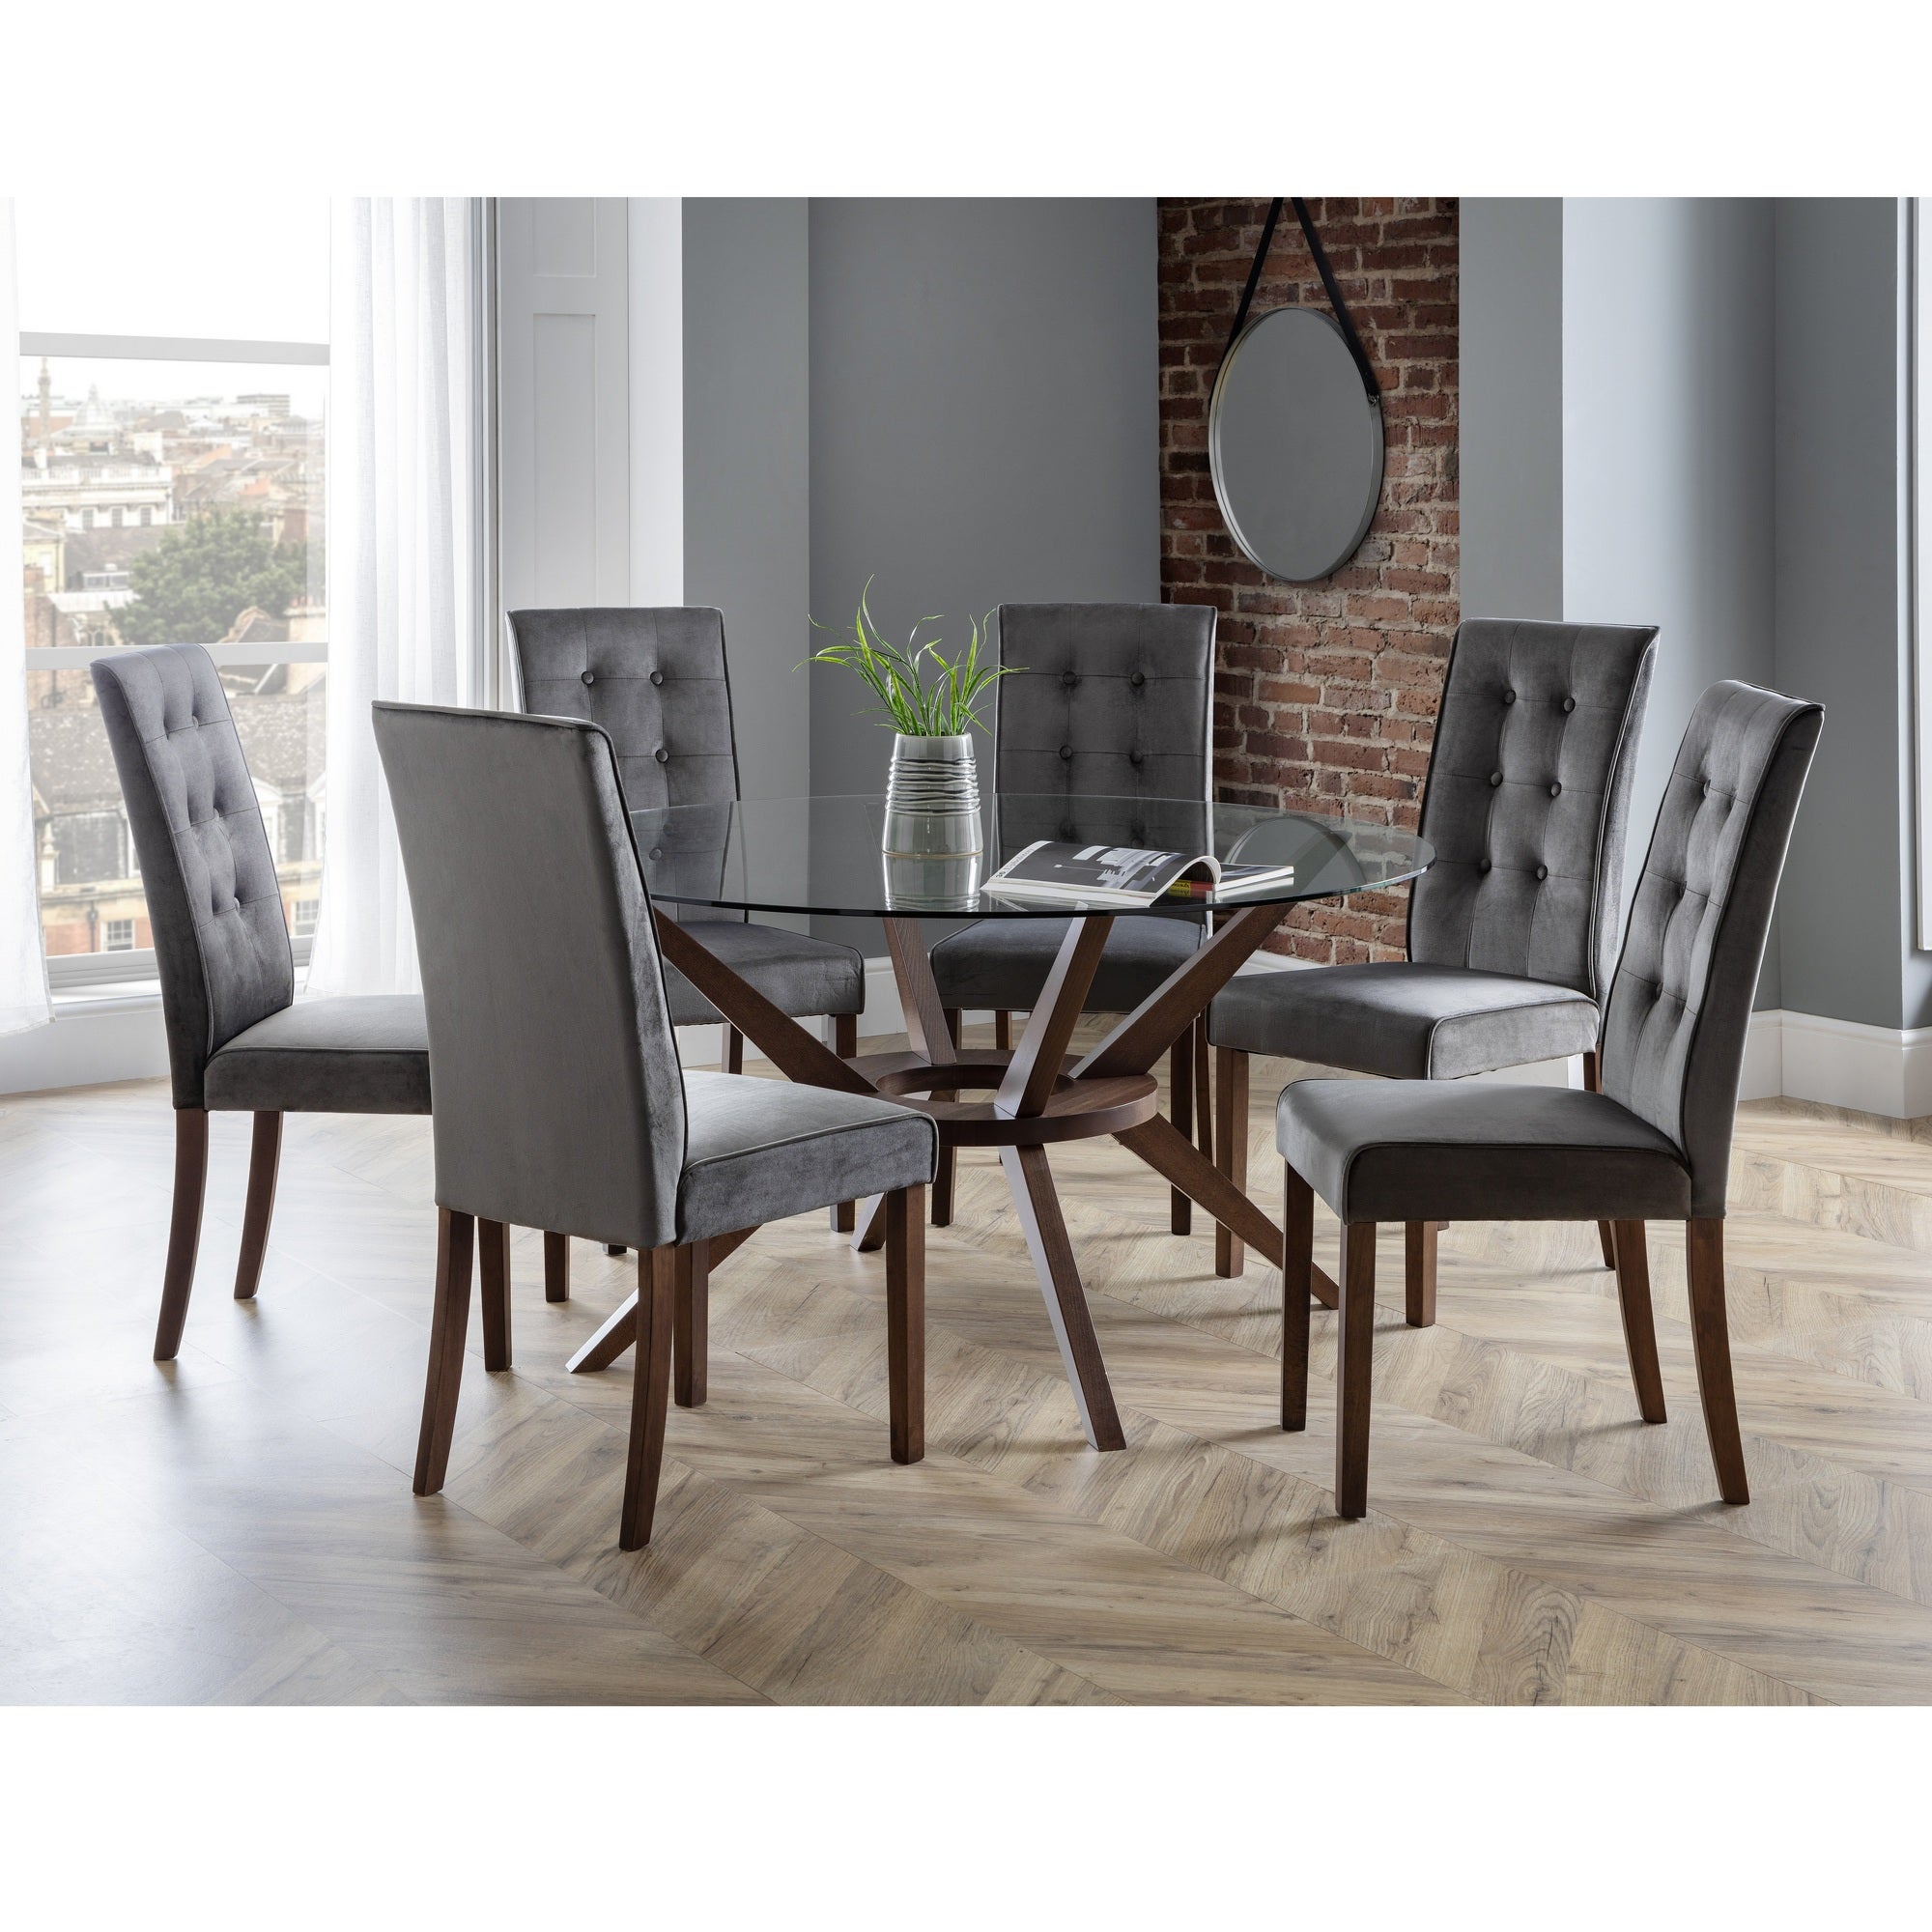 Chelsea Round Large Dining Table with 6 Madrid Chairs, Brown Glass Brown